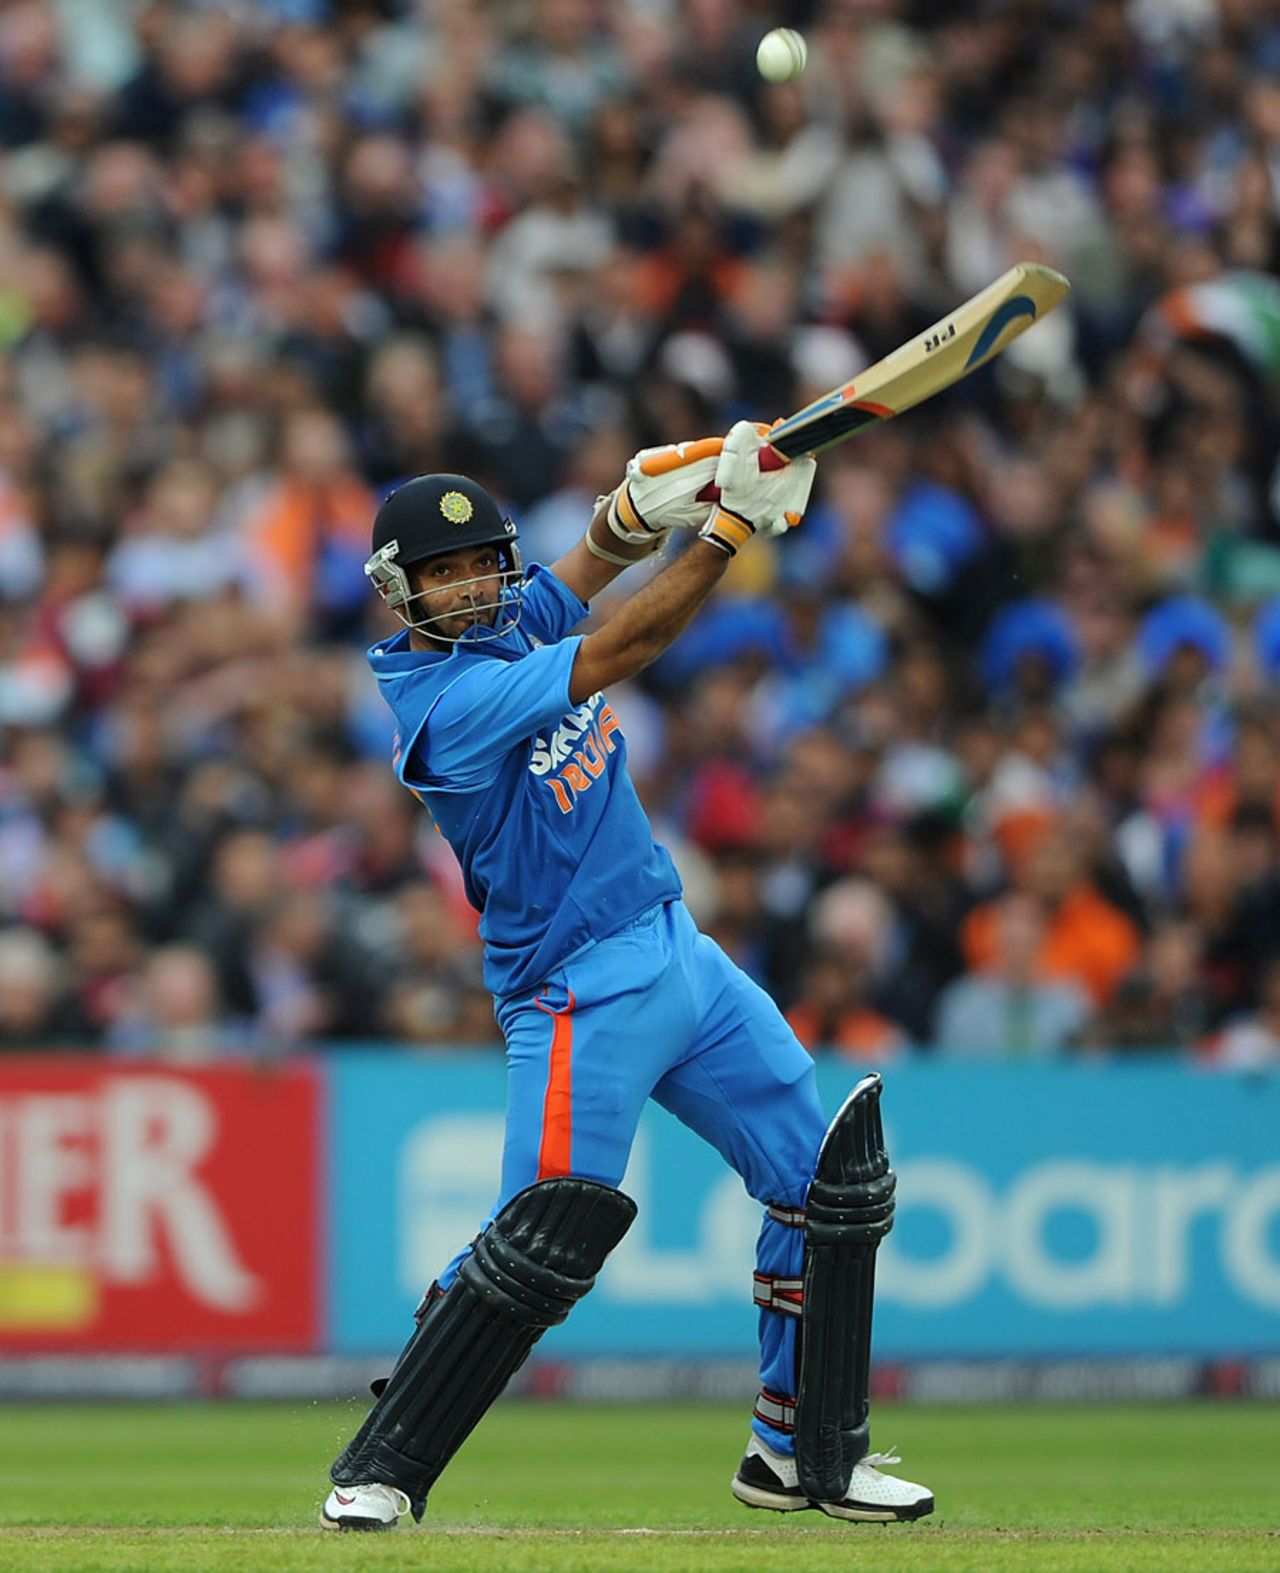 Ajinkya Rahane drives over the off side during his exciting innings, England v India, Twenty20, Old Trafford, August 31, 2011